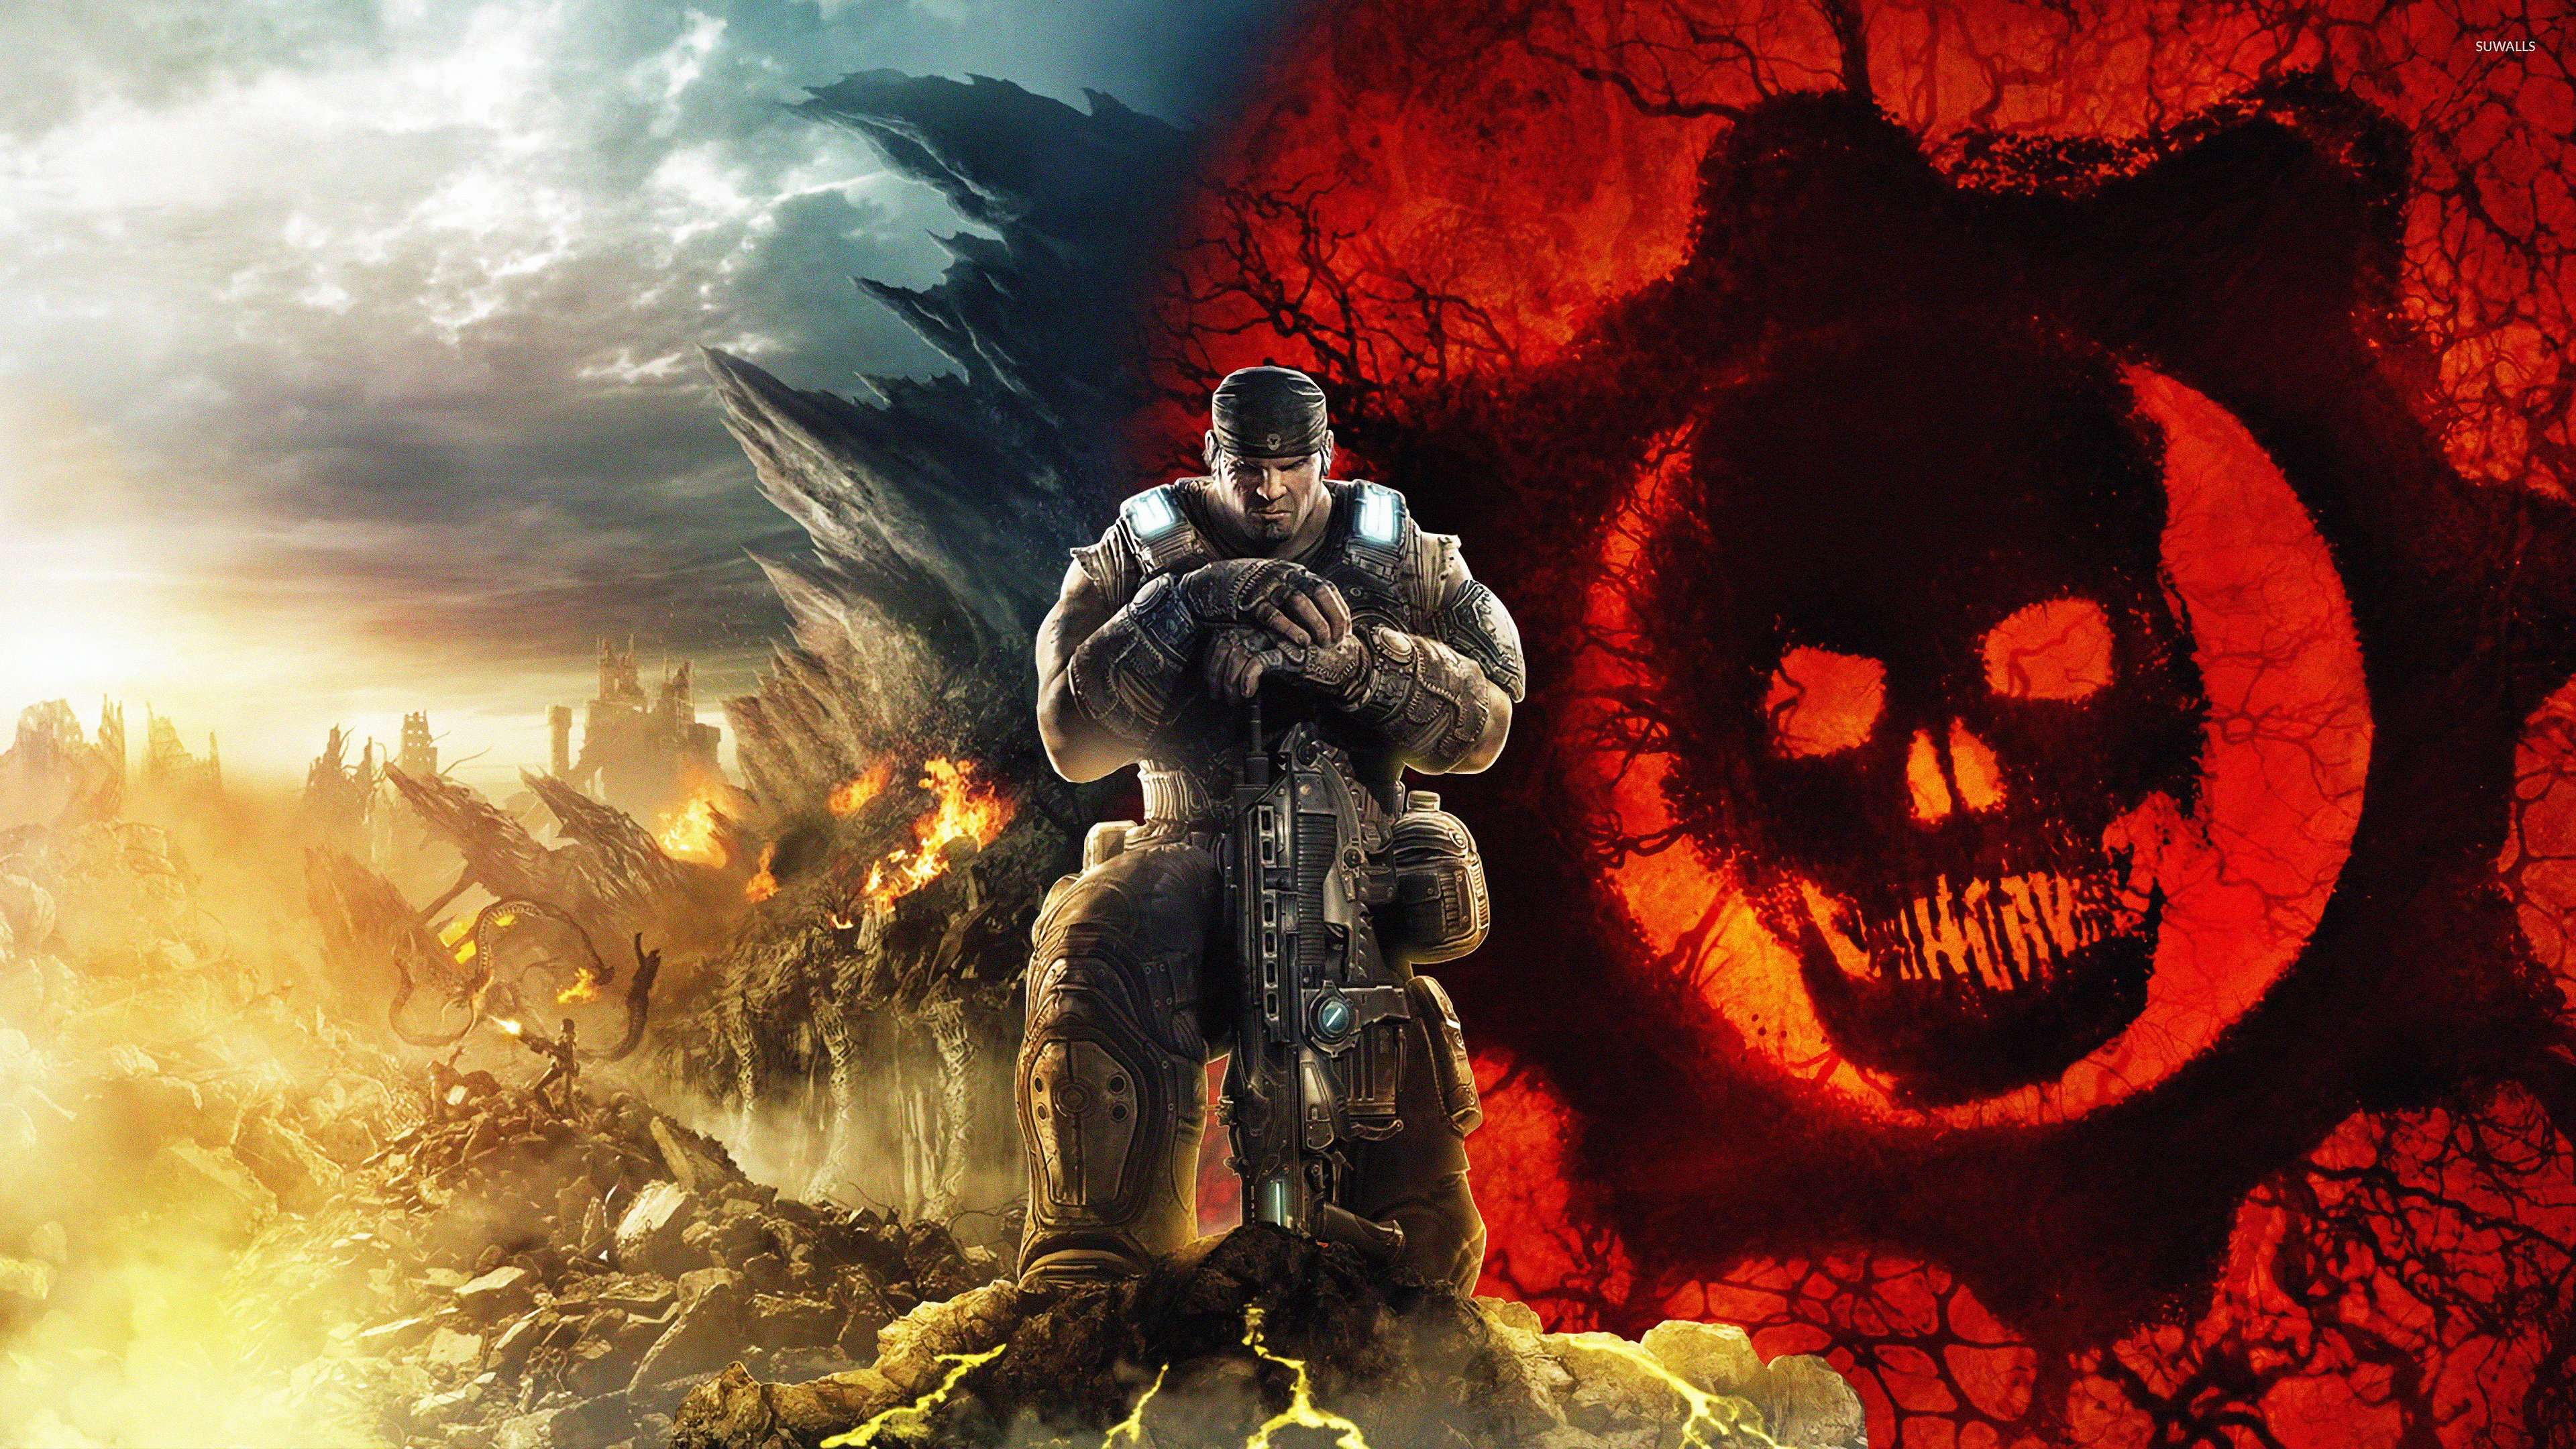 Gears 5 2019, Epic gaming experience, Stunning graphics, Unforgettable moments, 3840x2160 4K Desktop